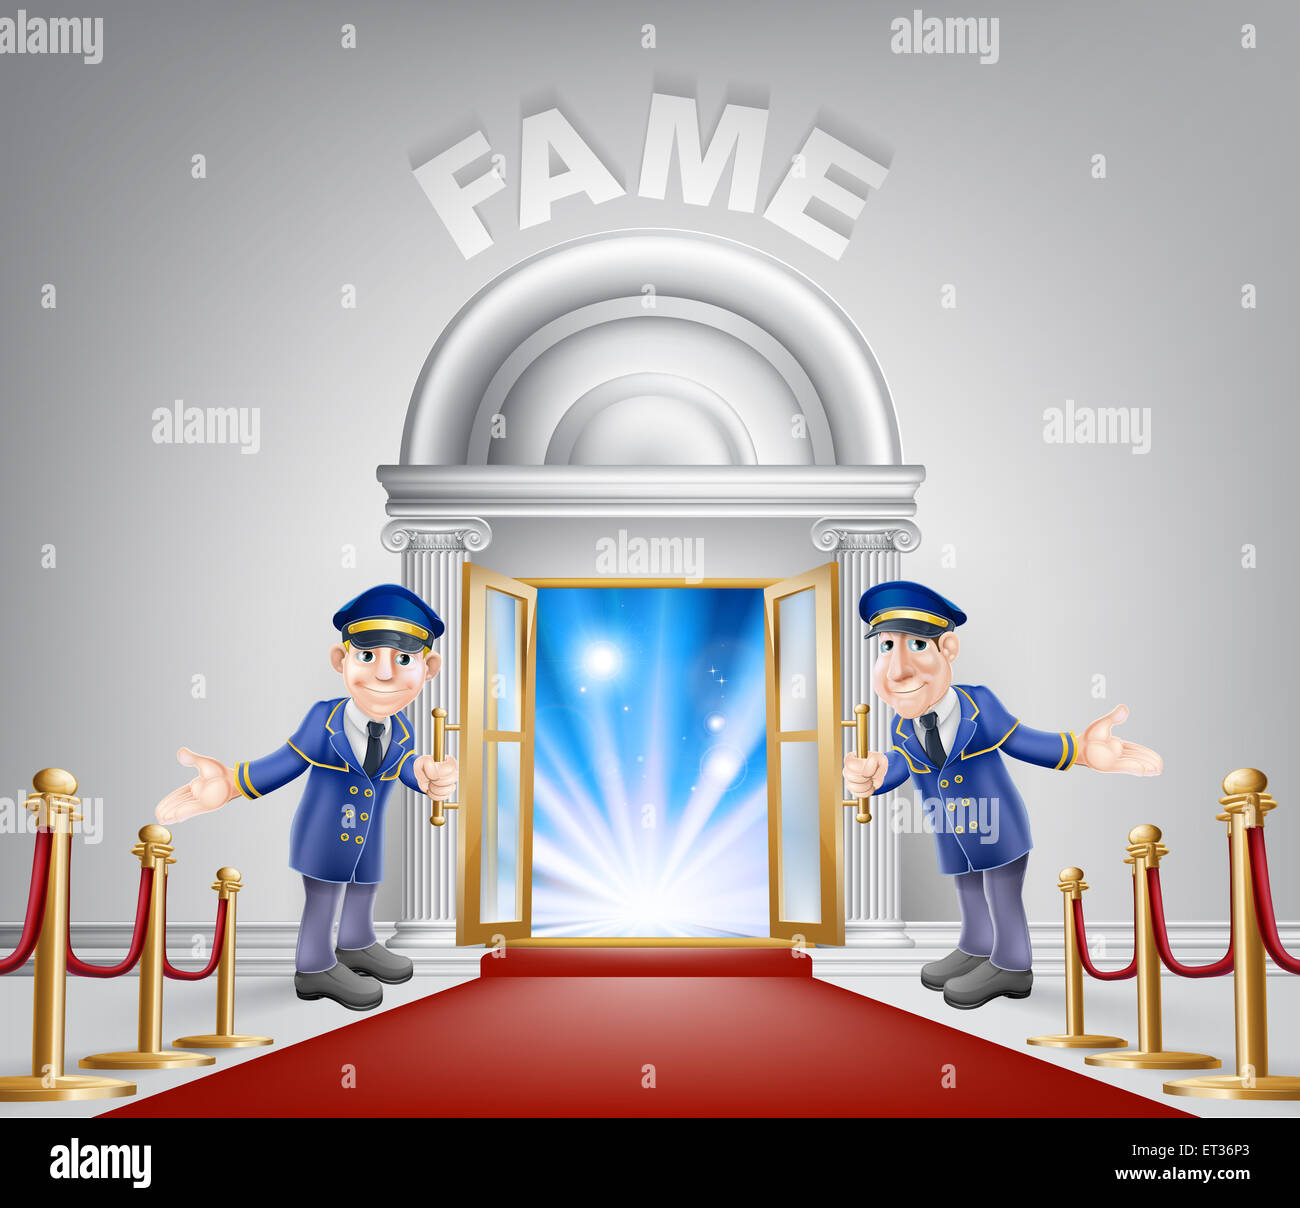 Fame door concept of a doormen holding open a door at a red carpet entrance with velvet ropes. Stock Photo